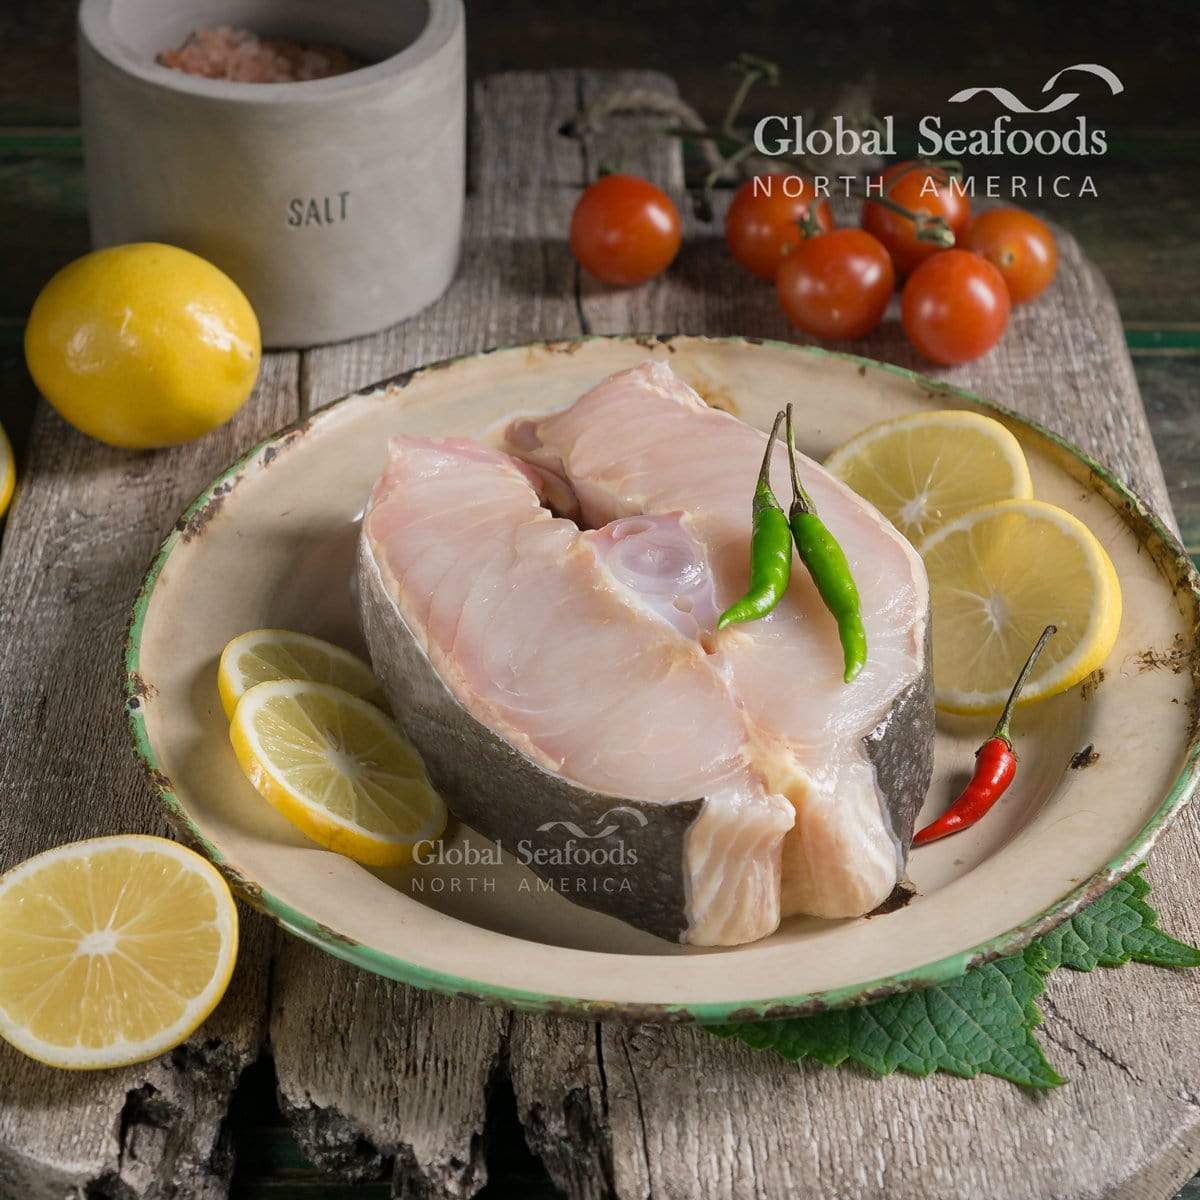 Freshly caught sturgeon displayed in a natural setting, emphasizing the premium quality and freshness of Global Seafoods' sturgeon products